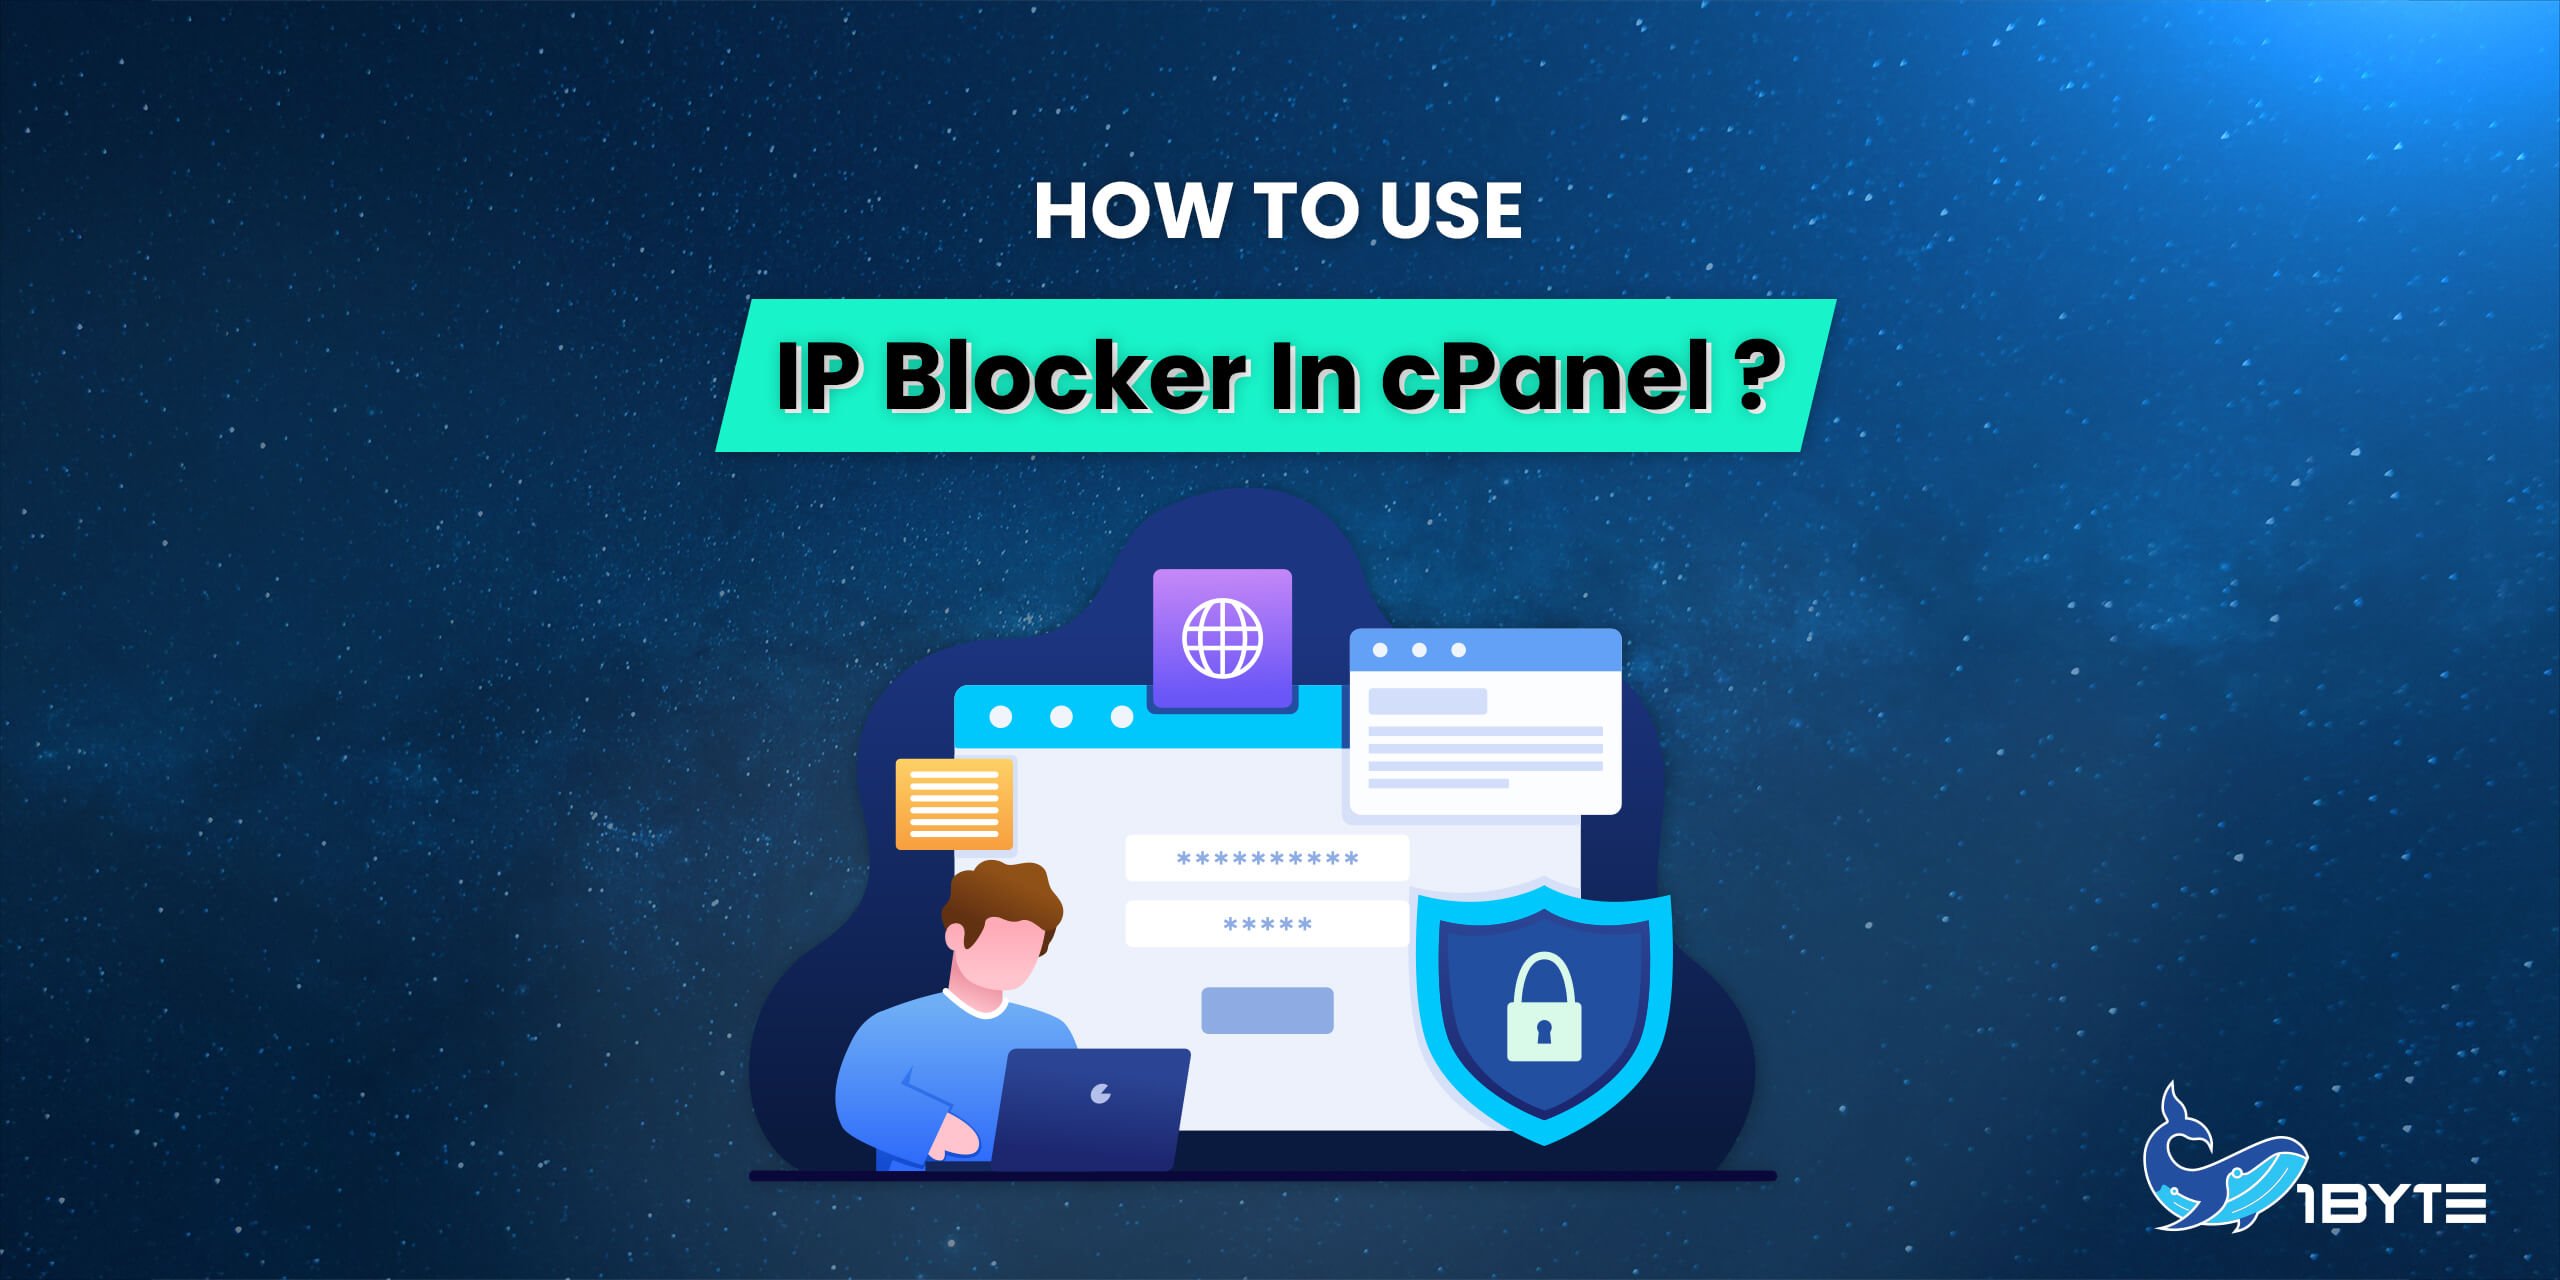 How to use IP Blocker in cPanel?